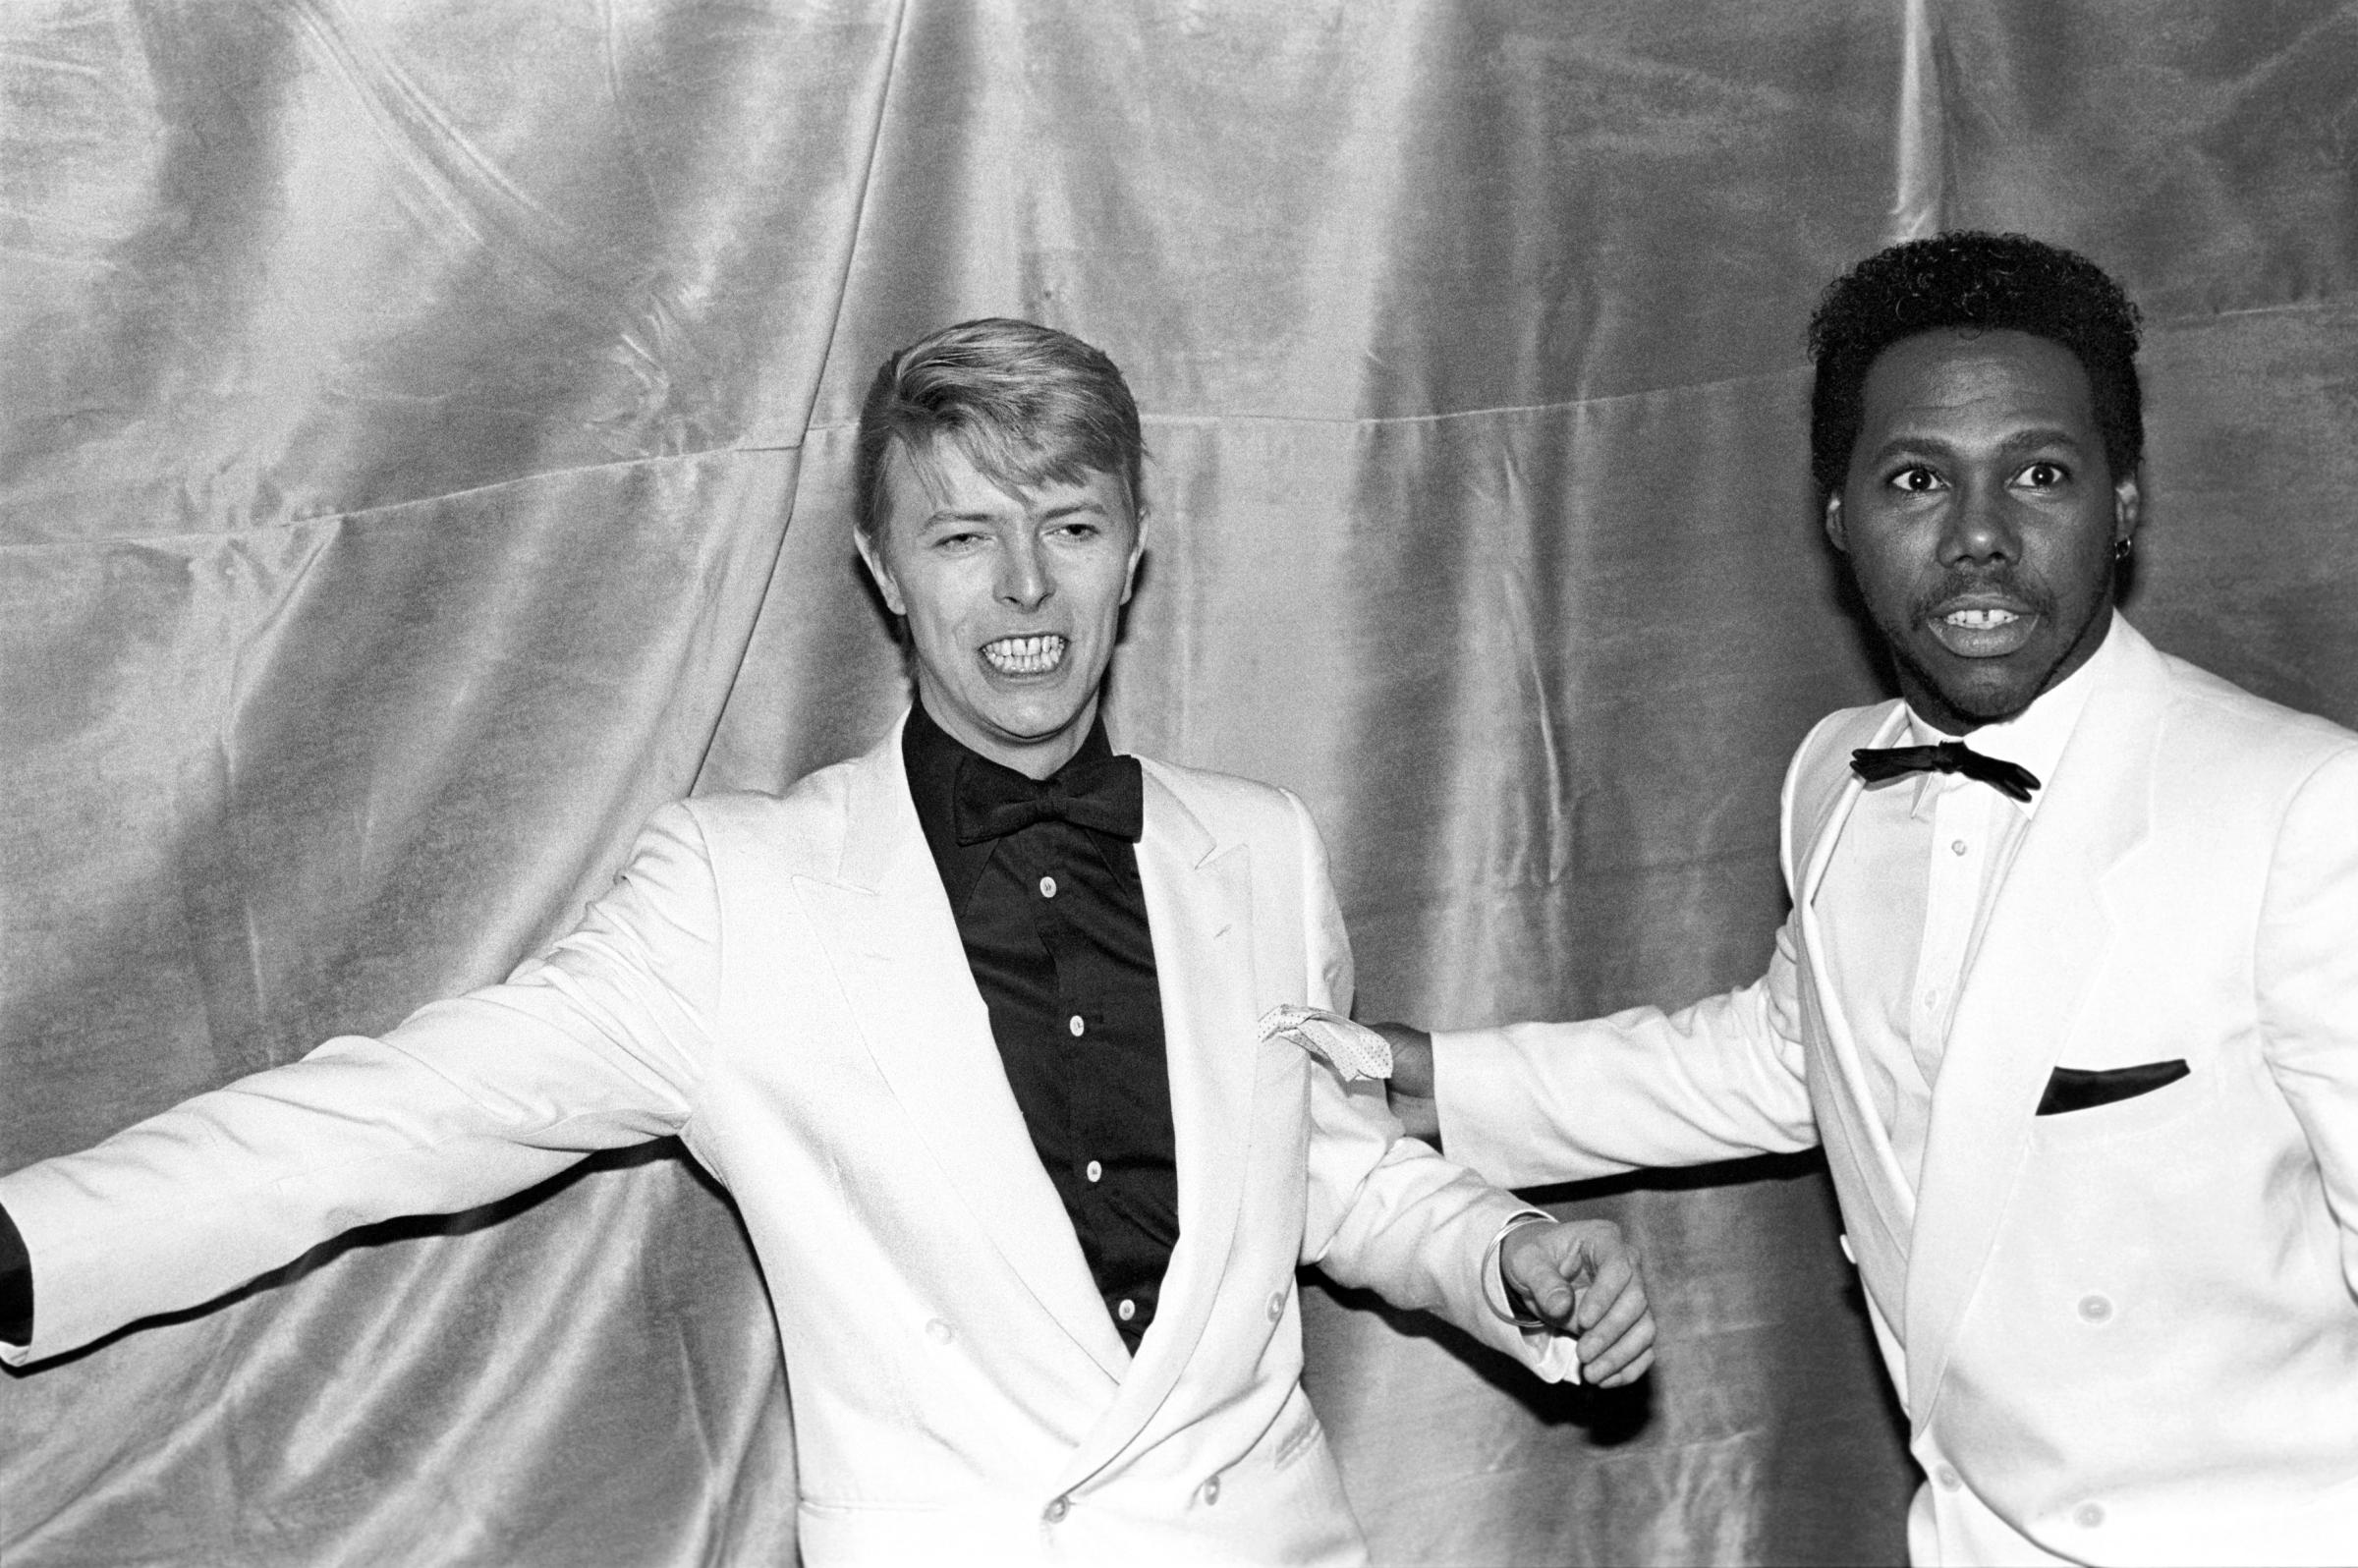 Nile Rodgers, Let's Dance, 1983.